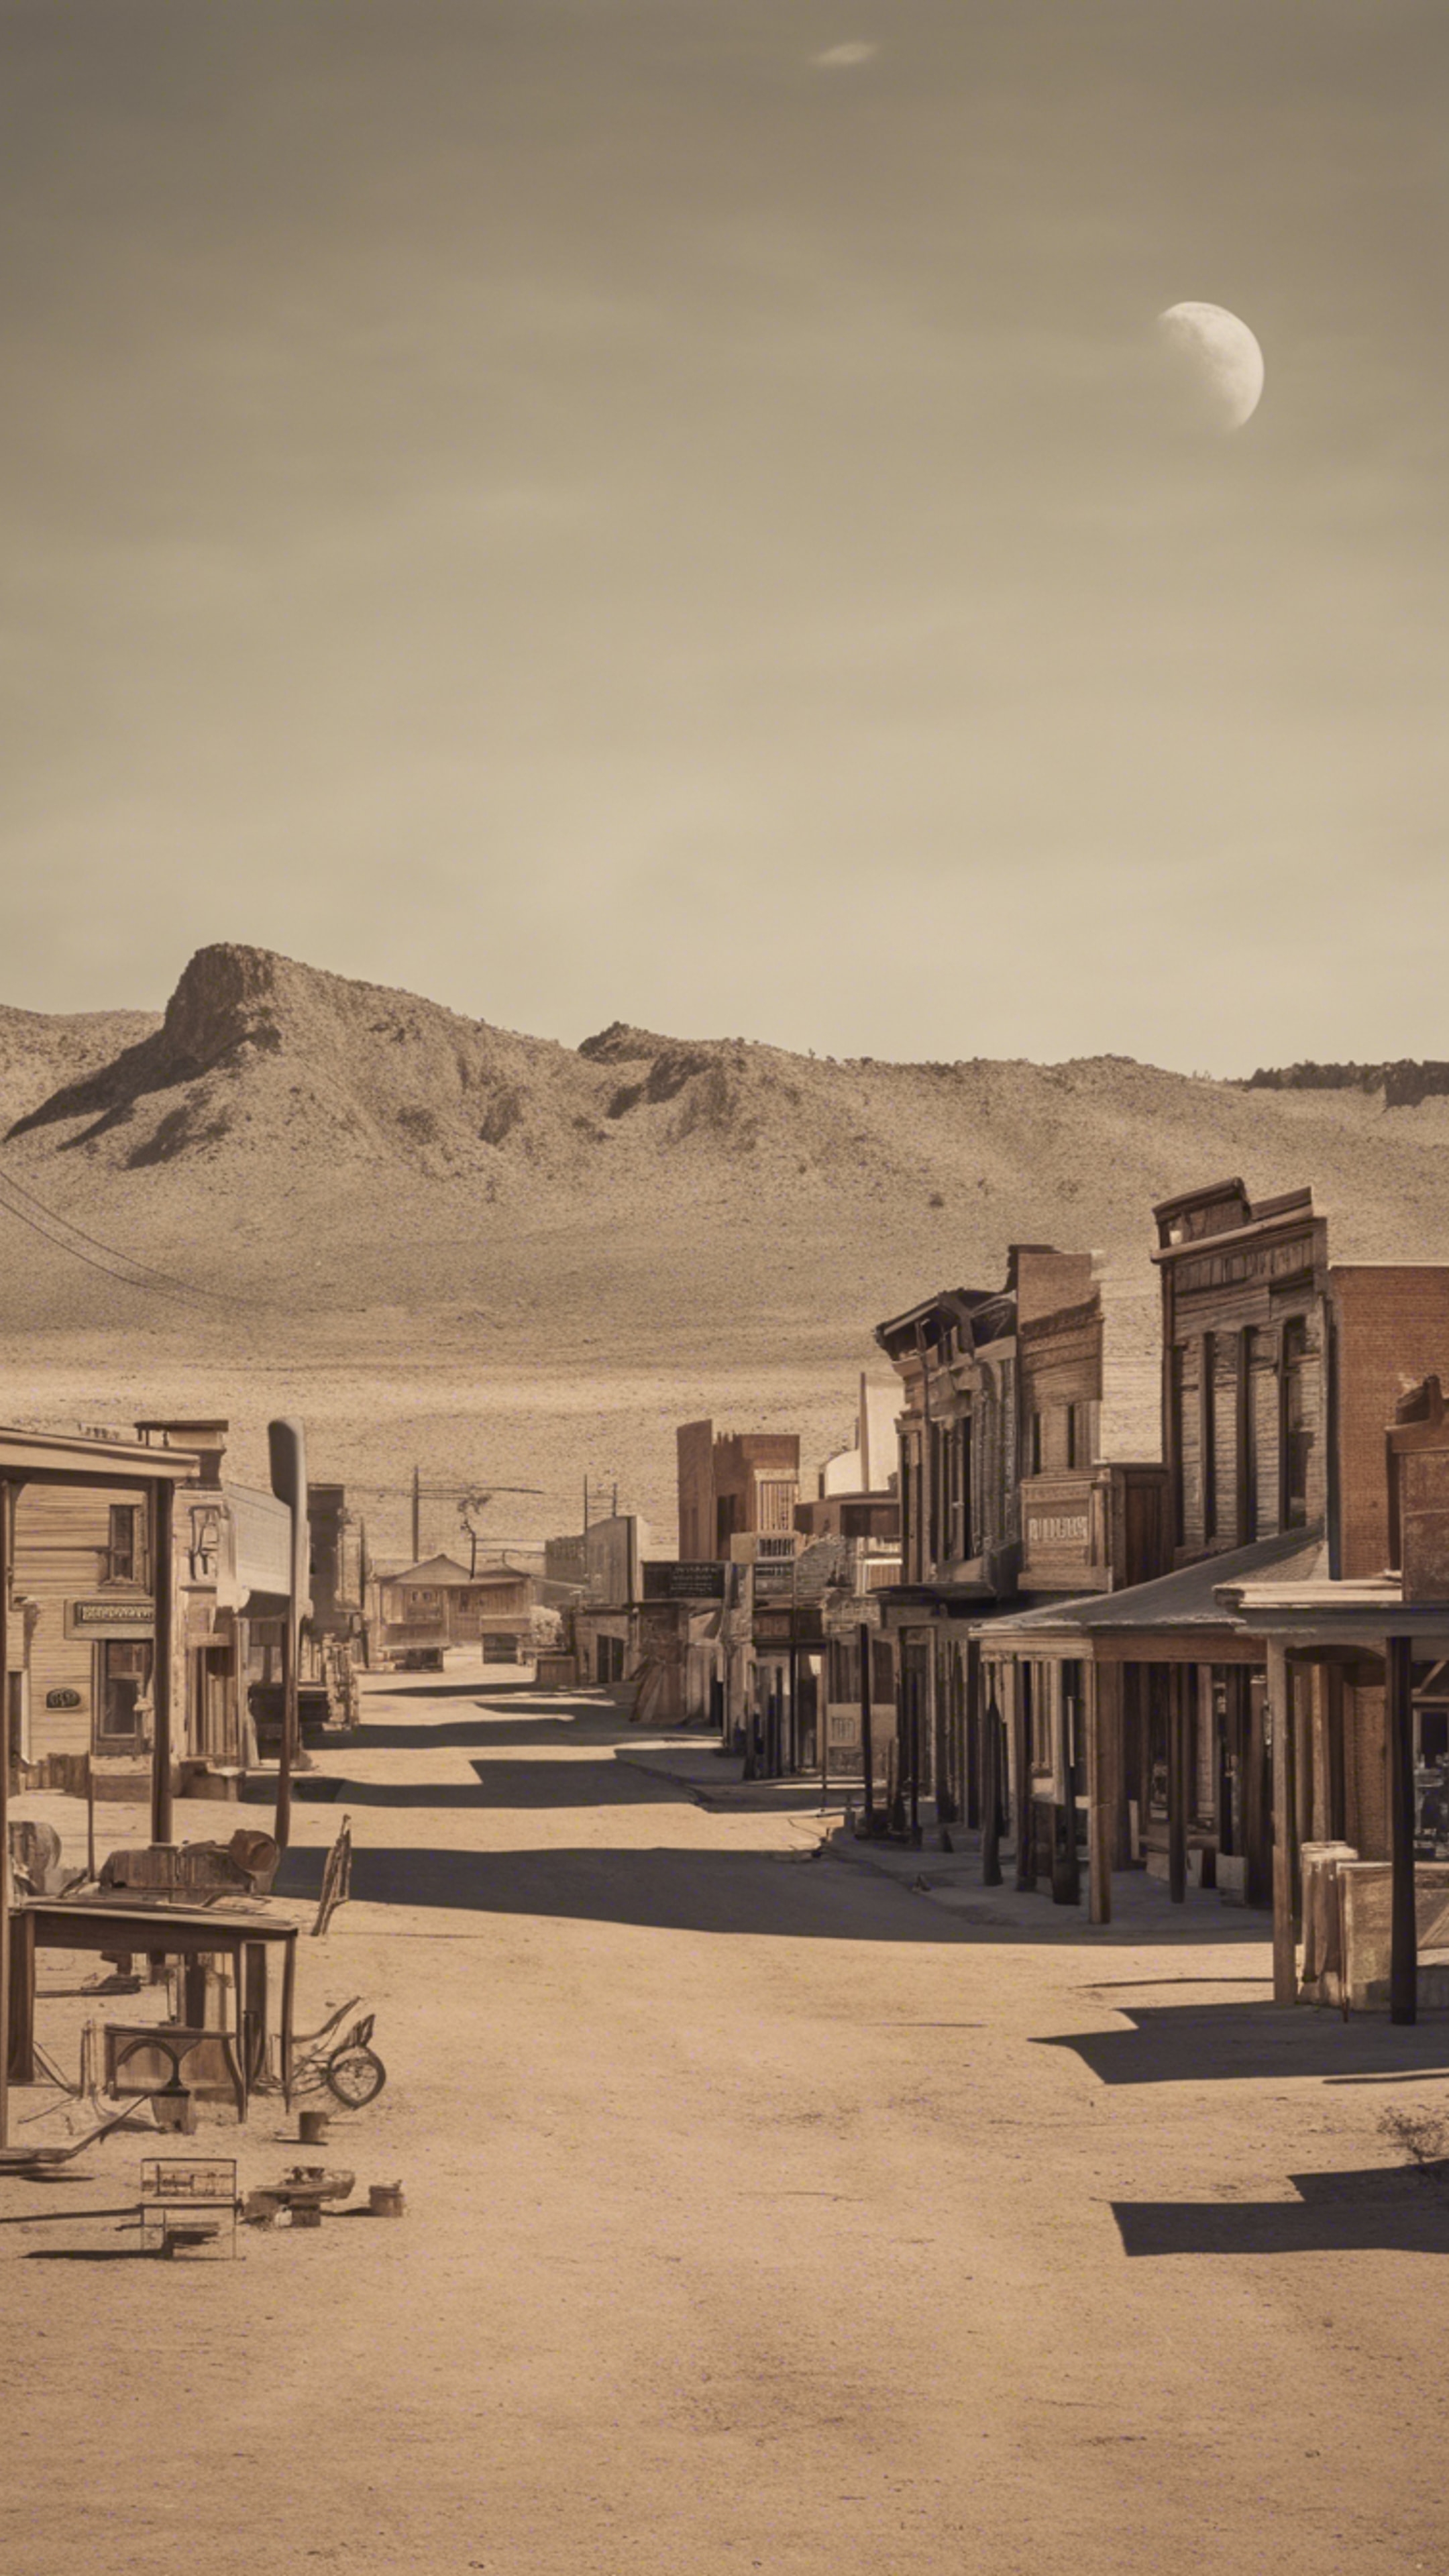 A nostalgic portrayal of a deserted old western town skyline at high noon. Tapet[6f3773f399464a7985e4]